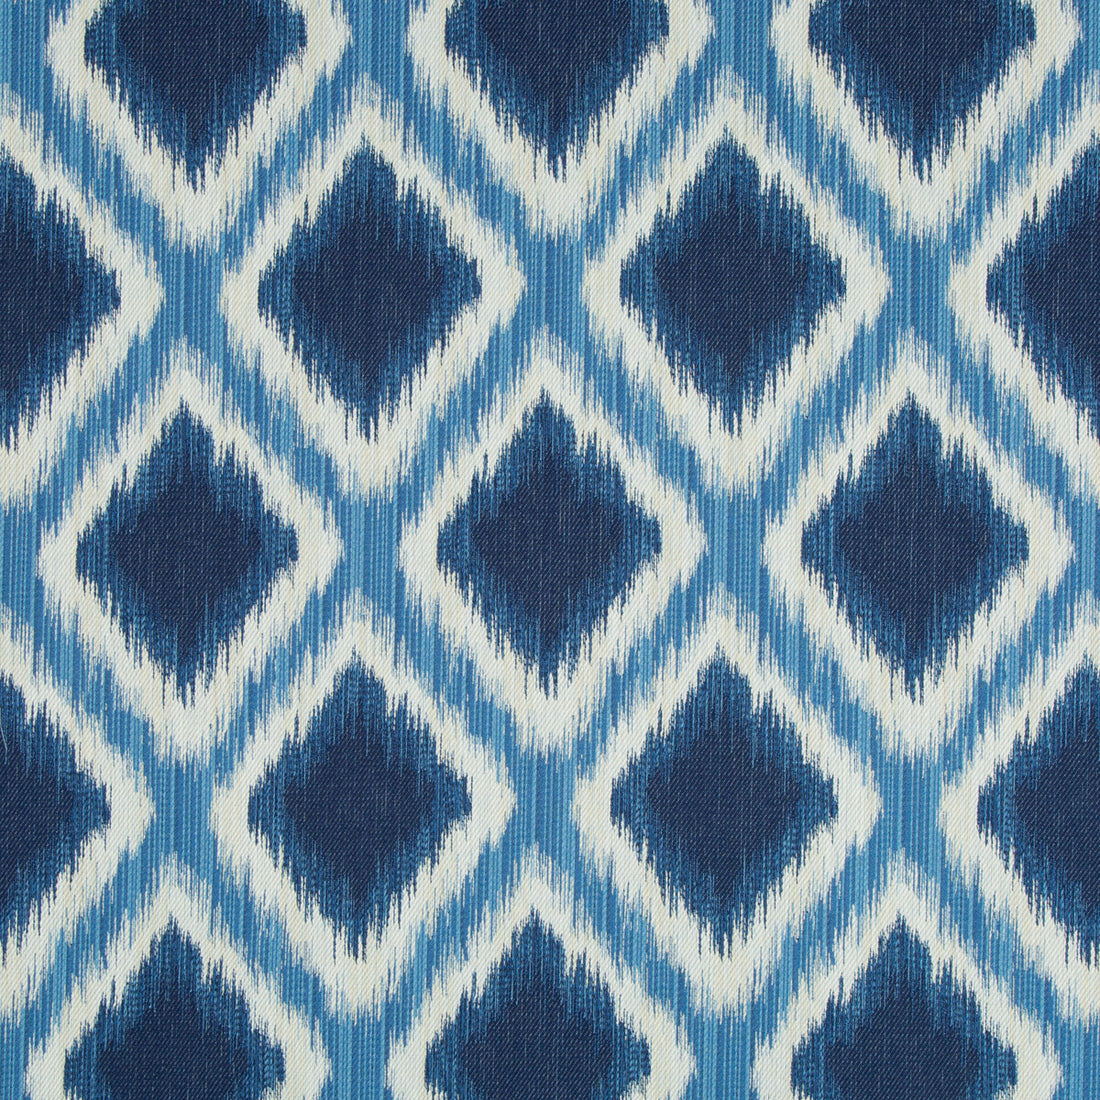 Kapari Woven fabric in marine color - pattern 8017147.5.0 - by Brunschwig &amp; Fils in the En Vacances collection